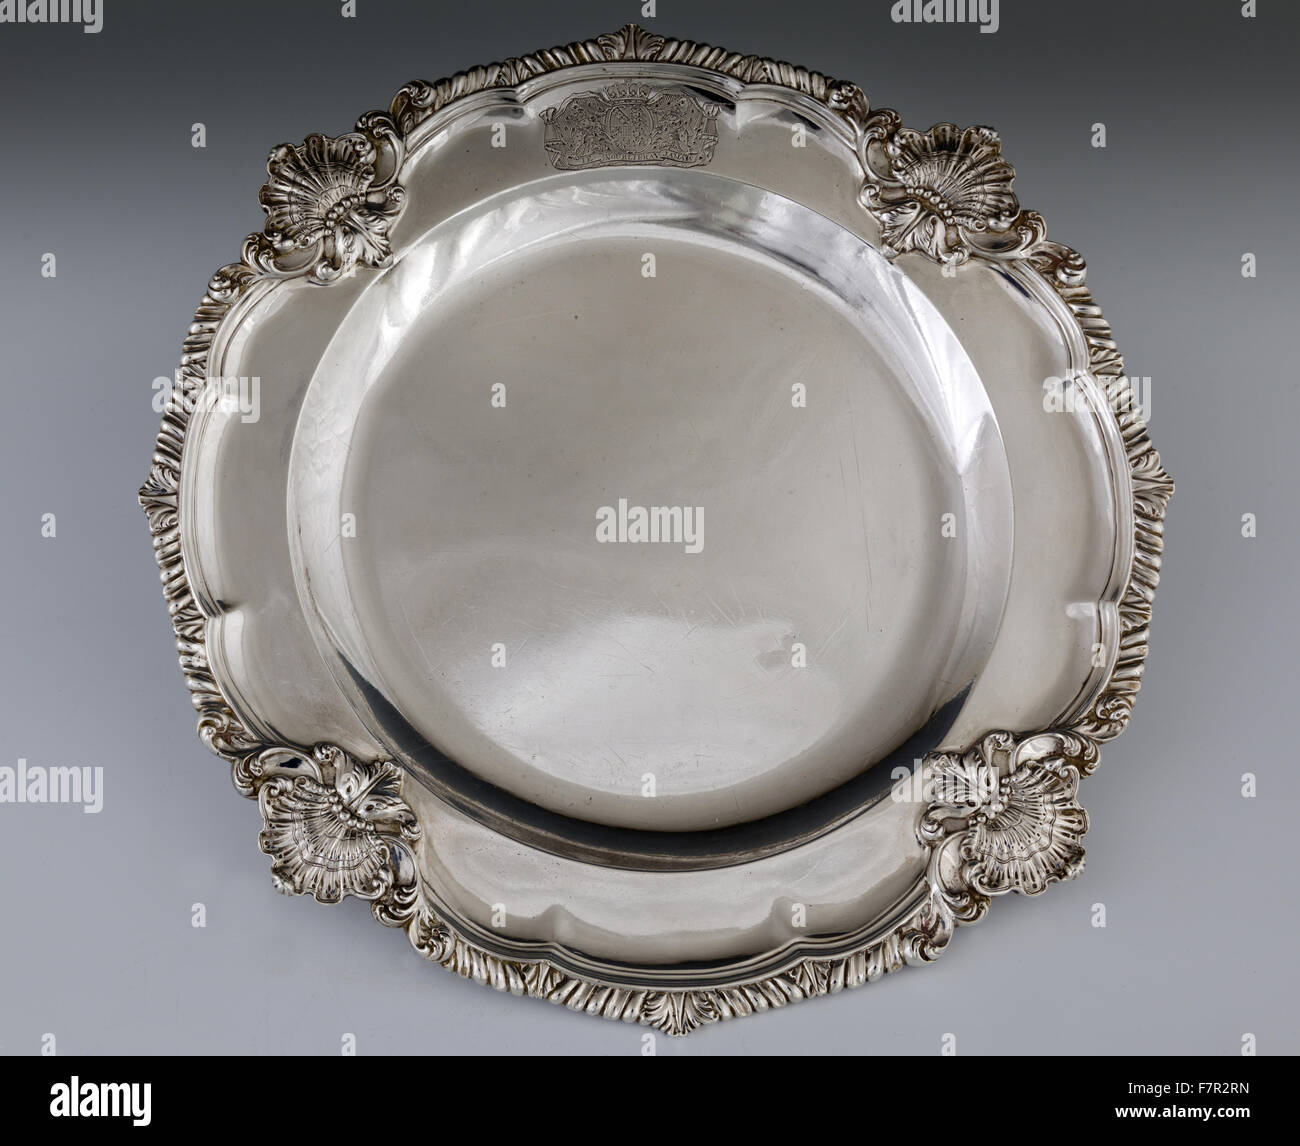 Circular second course dish, 1754, Frederick Kandler, silver at Ickworth, Suffolk. National Trust Inventory number 852121.2. Stock Photo